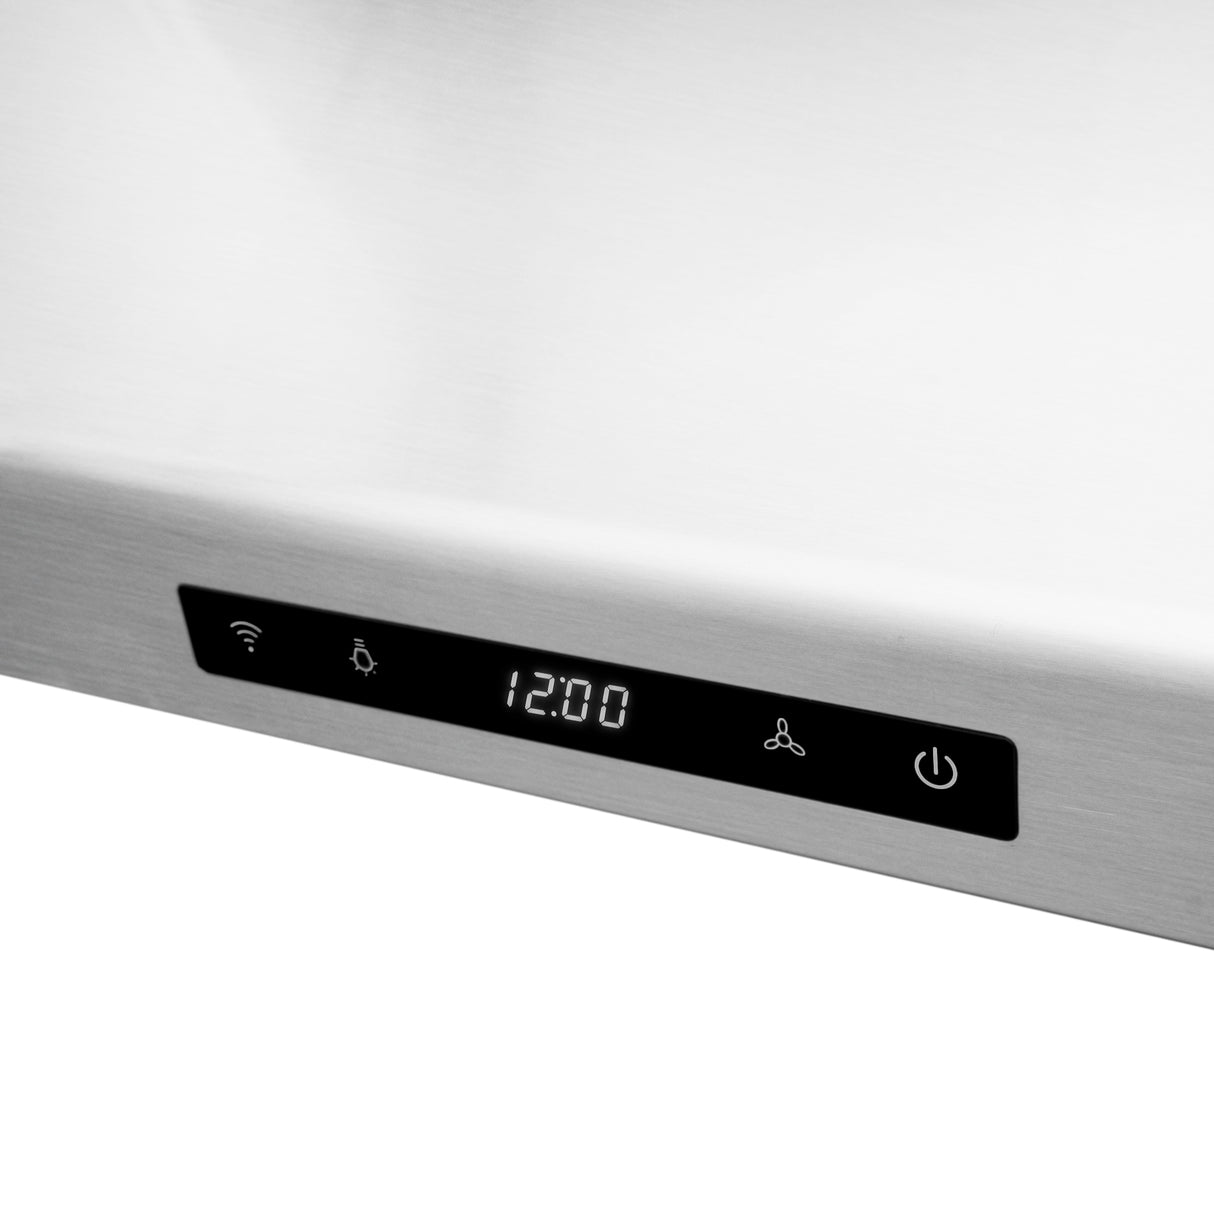 Cosmo 36" Under Cabinet Range Hood with Digital Touch Controls in Stainless Steel